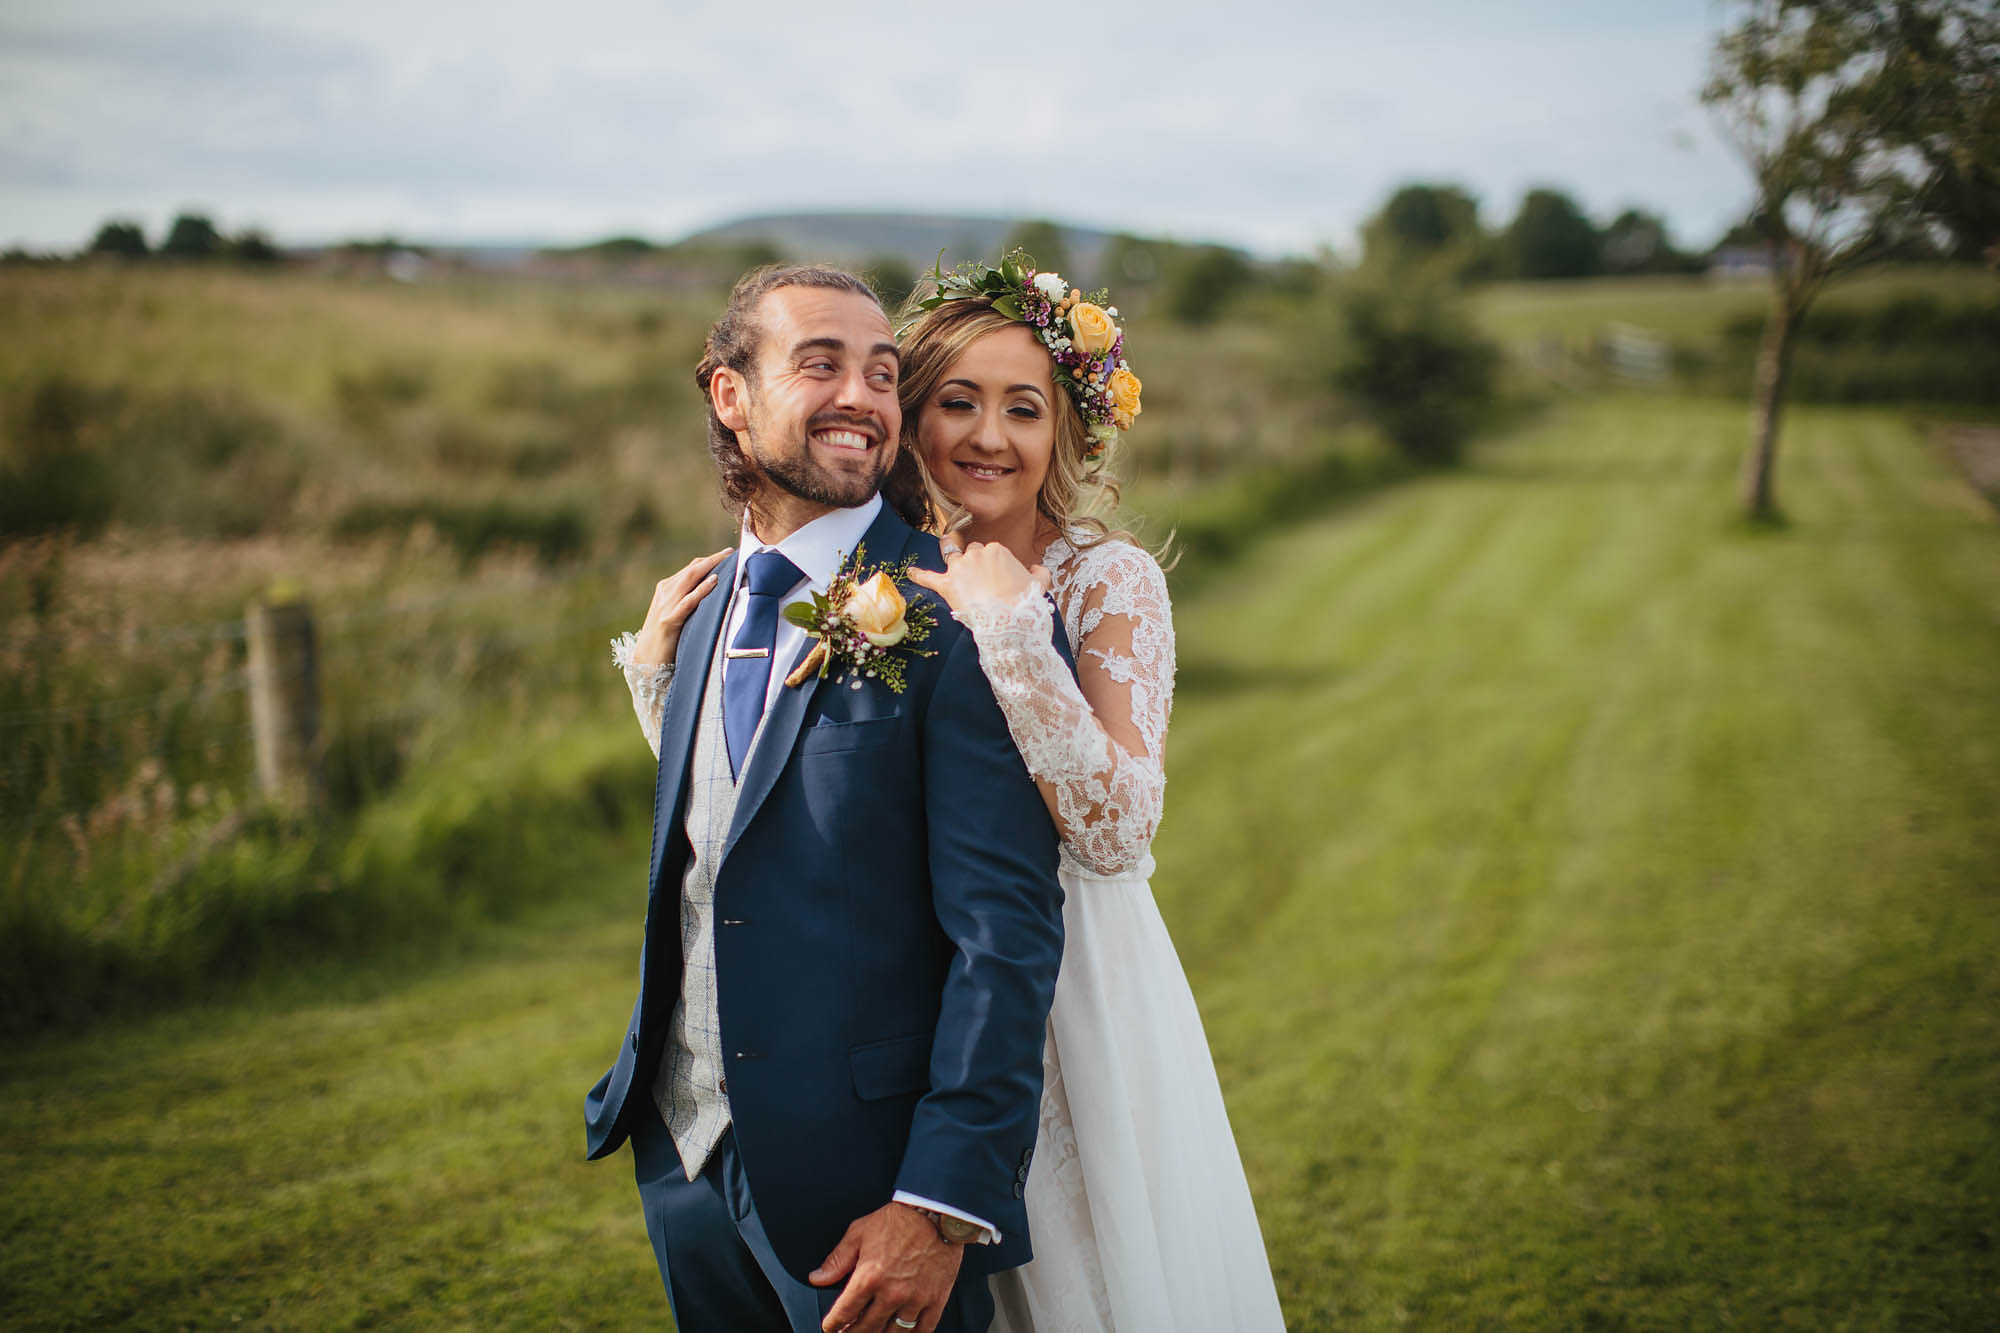 Bride and groom portrait at the Bolholt Country Park